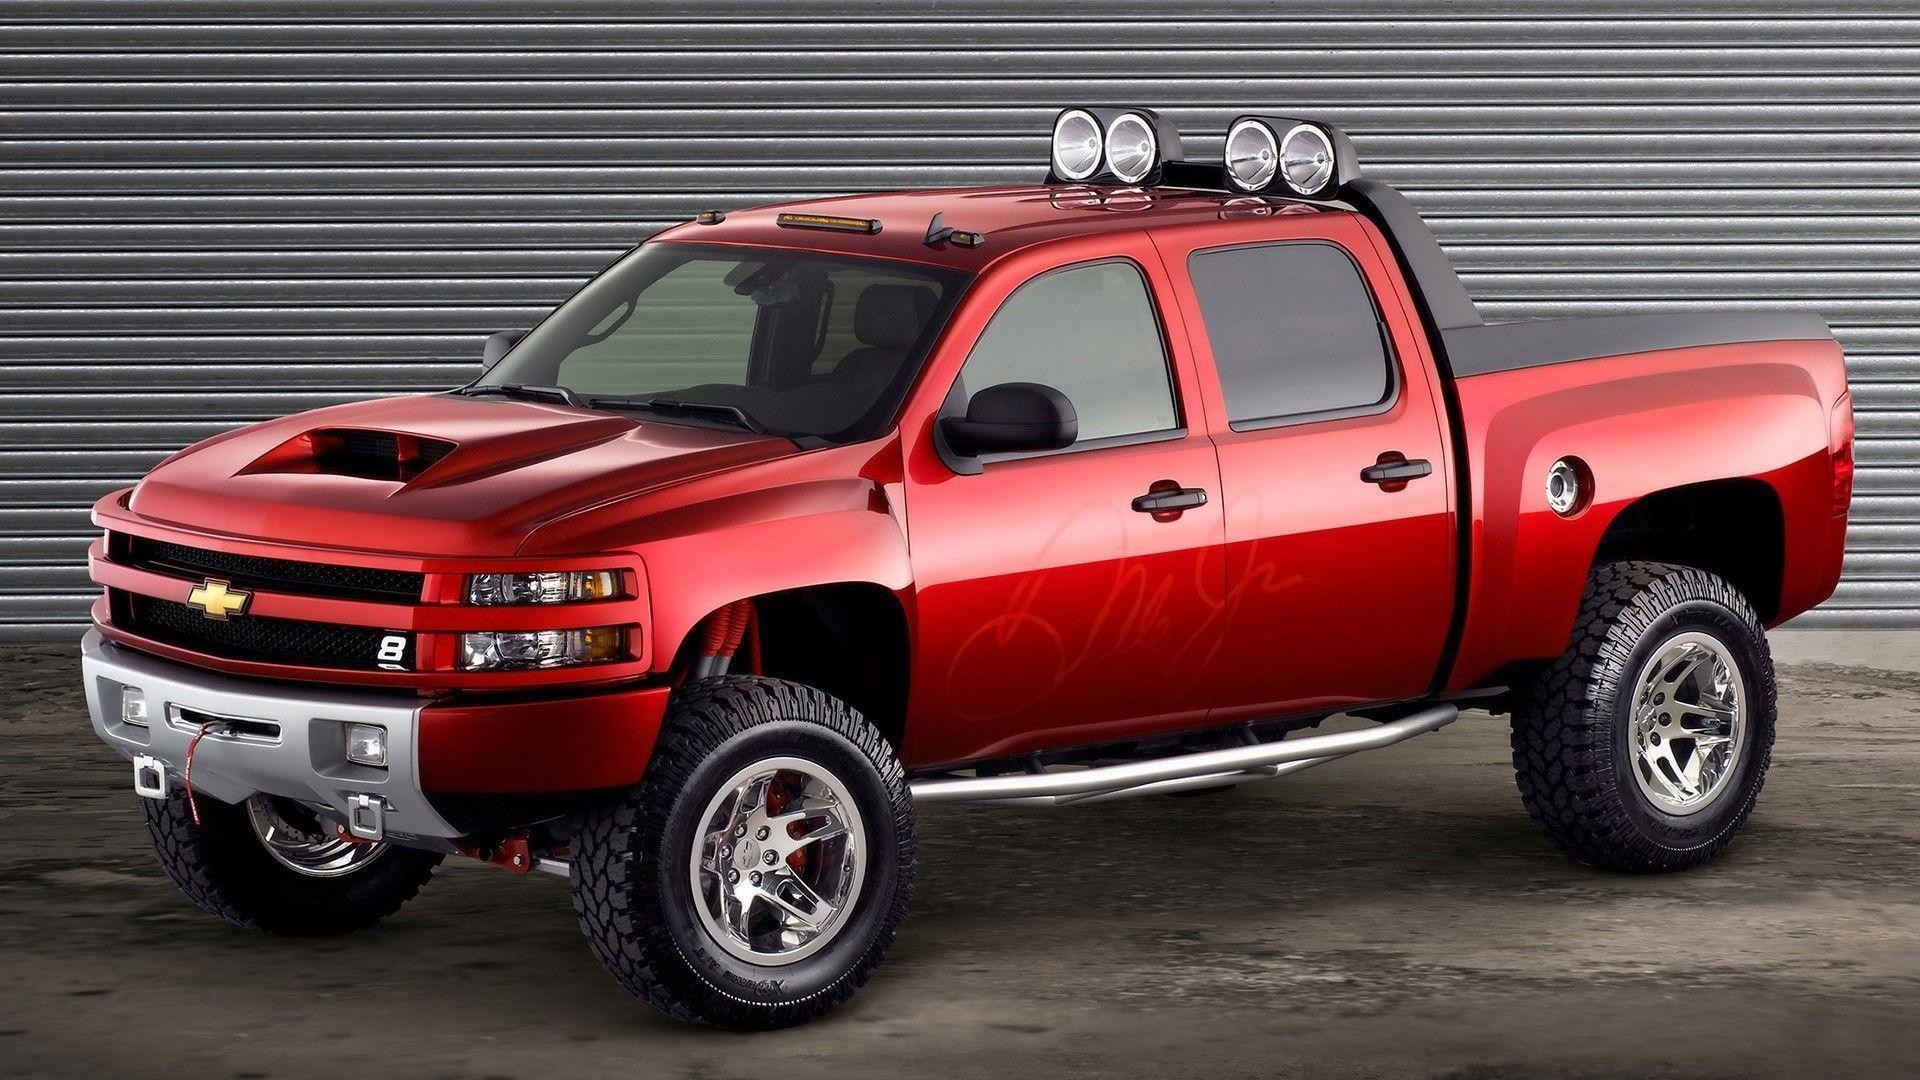 Lifted Chevy Truck Wallpapers 1599Ã1059 Lifted Truck Wallpapers .